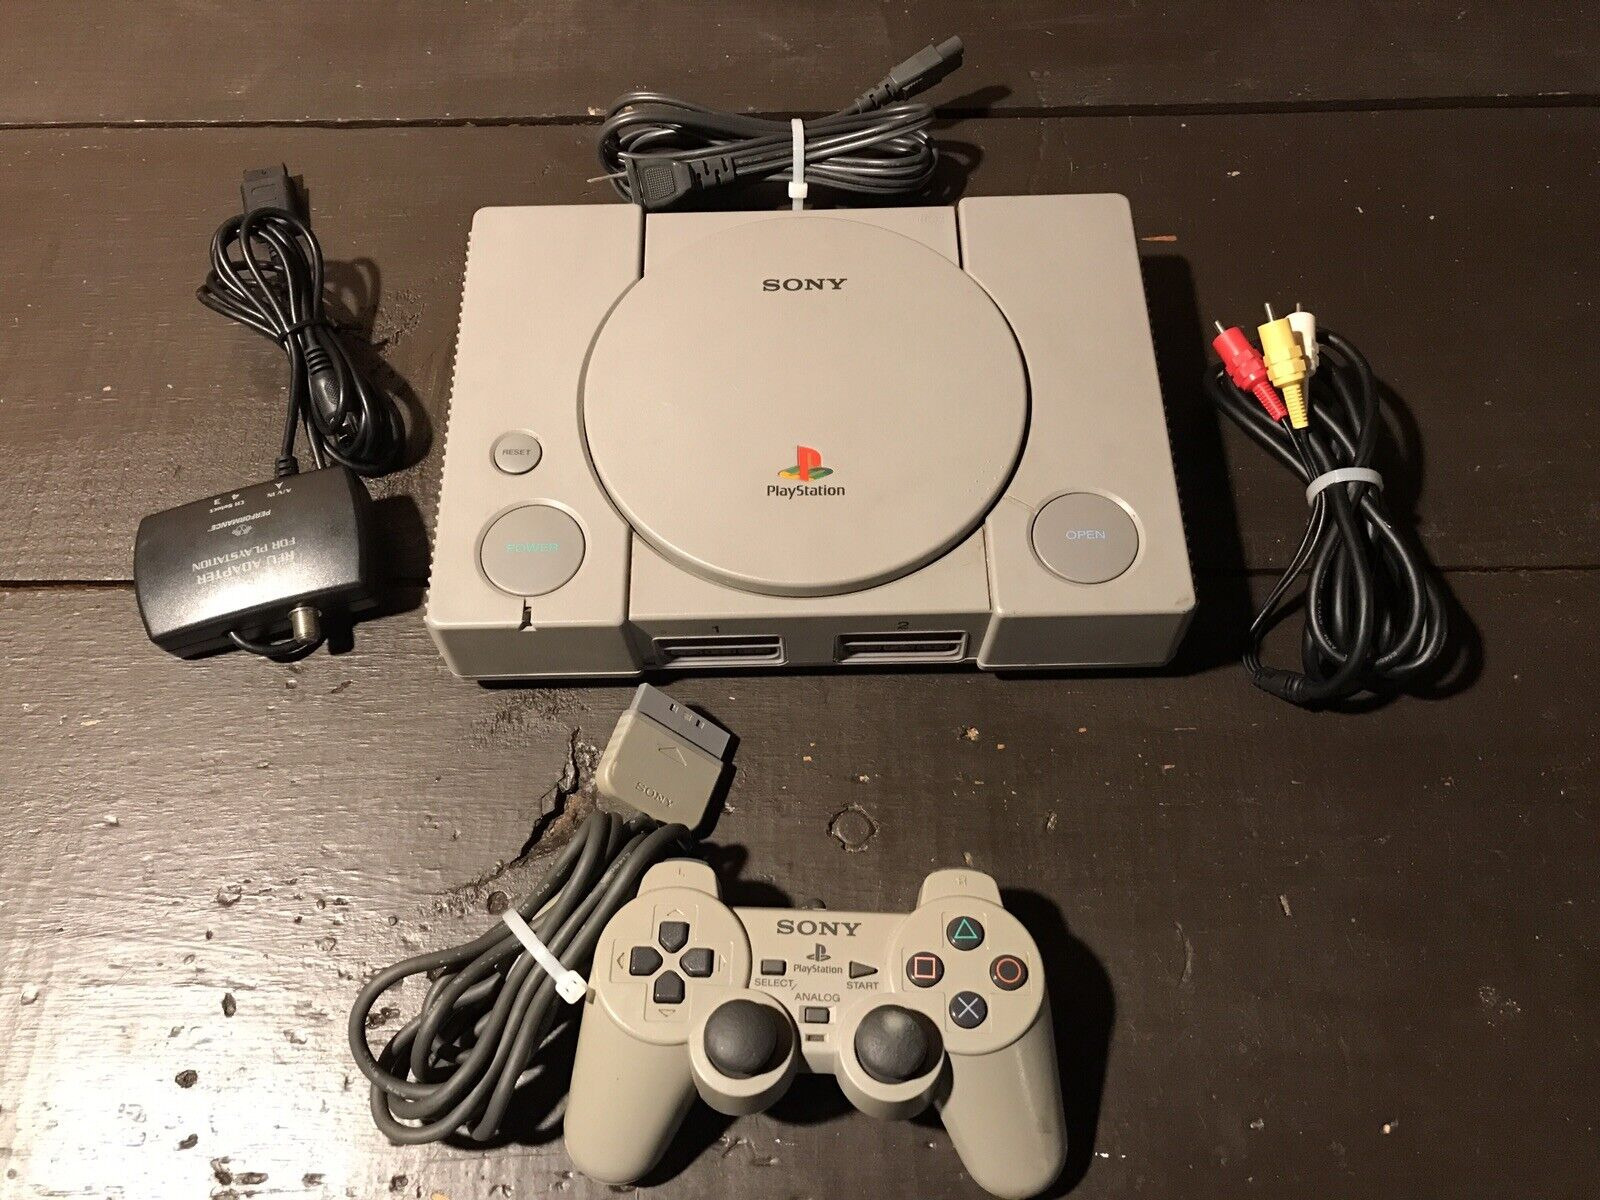 https://truemedian.com/sony-playstation-ps1-gray-console-system-scph-1001-w-analog-controller-tested/